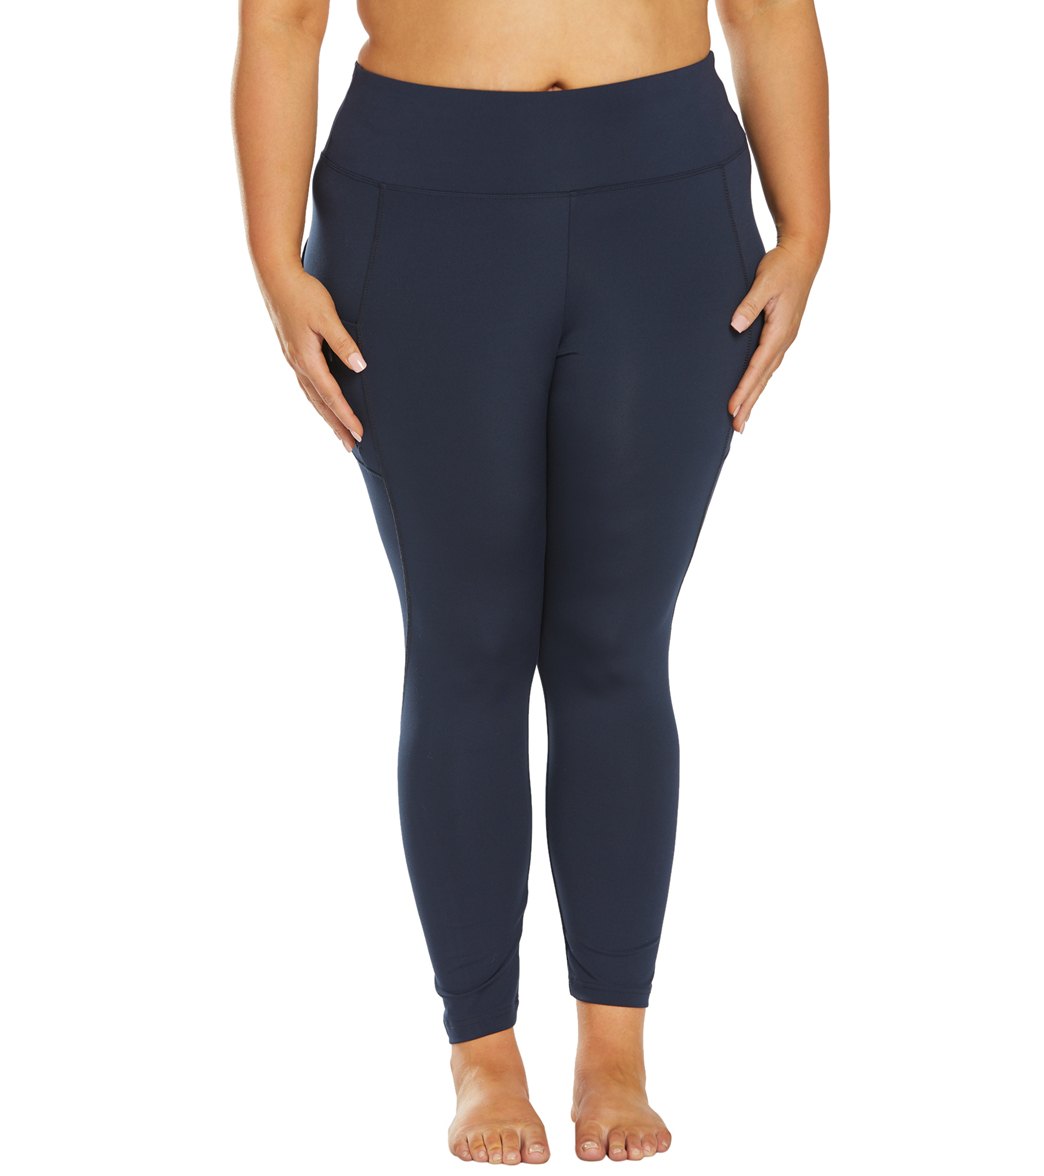 Marika Fitness - 35% off shapewear - use code: FITTED Sale ends 1/11, click  to shop: https://bit.ly/3JLst7P ✨ | Facebook